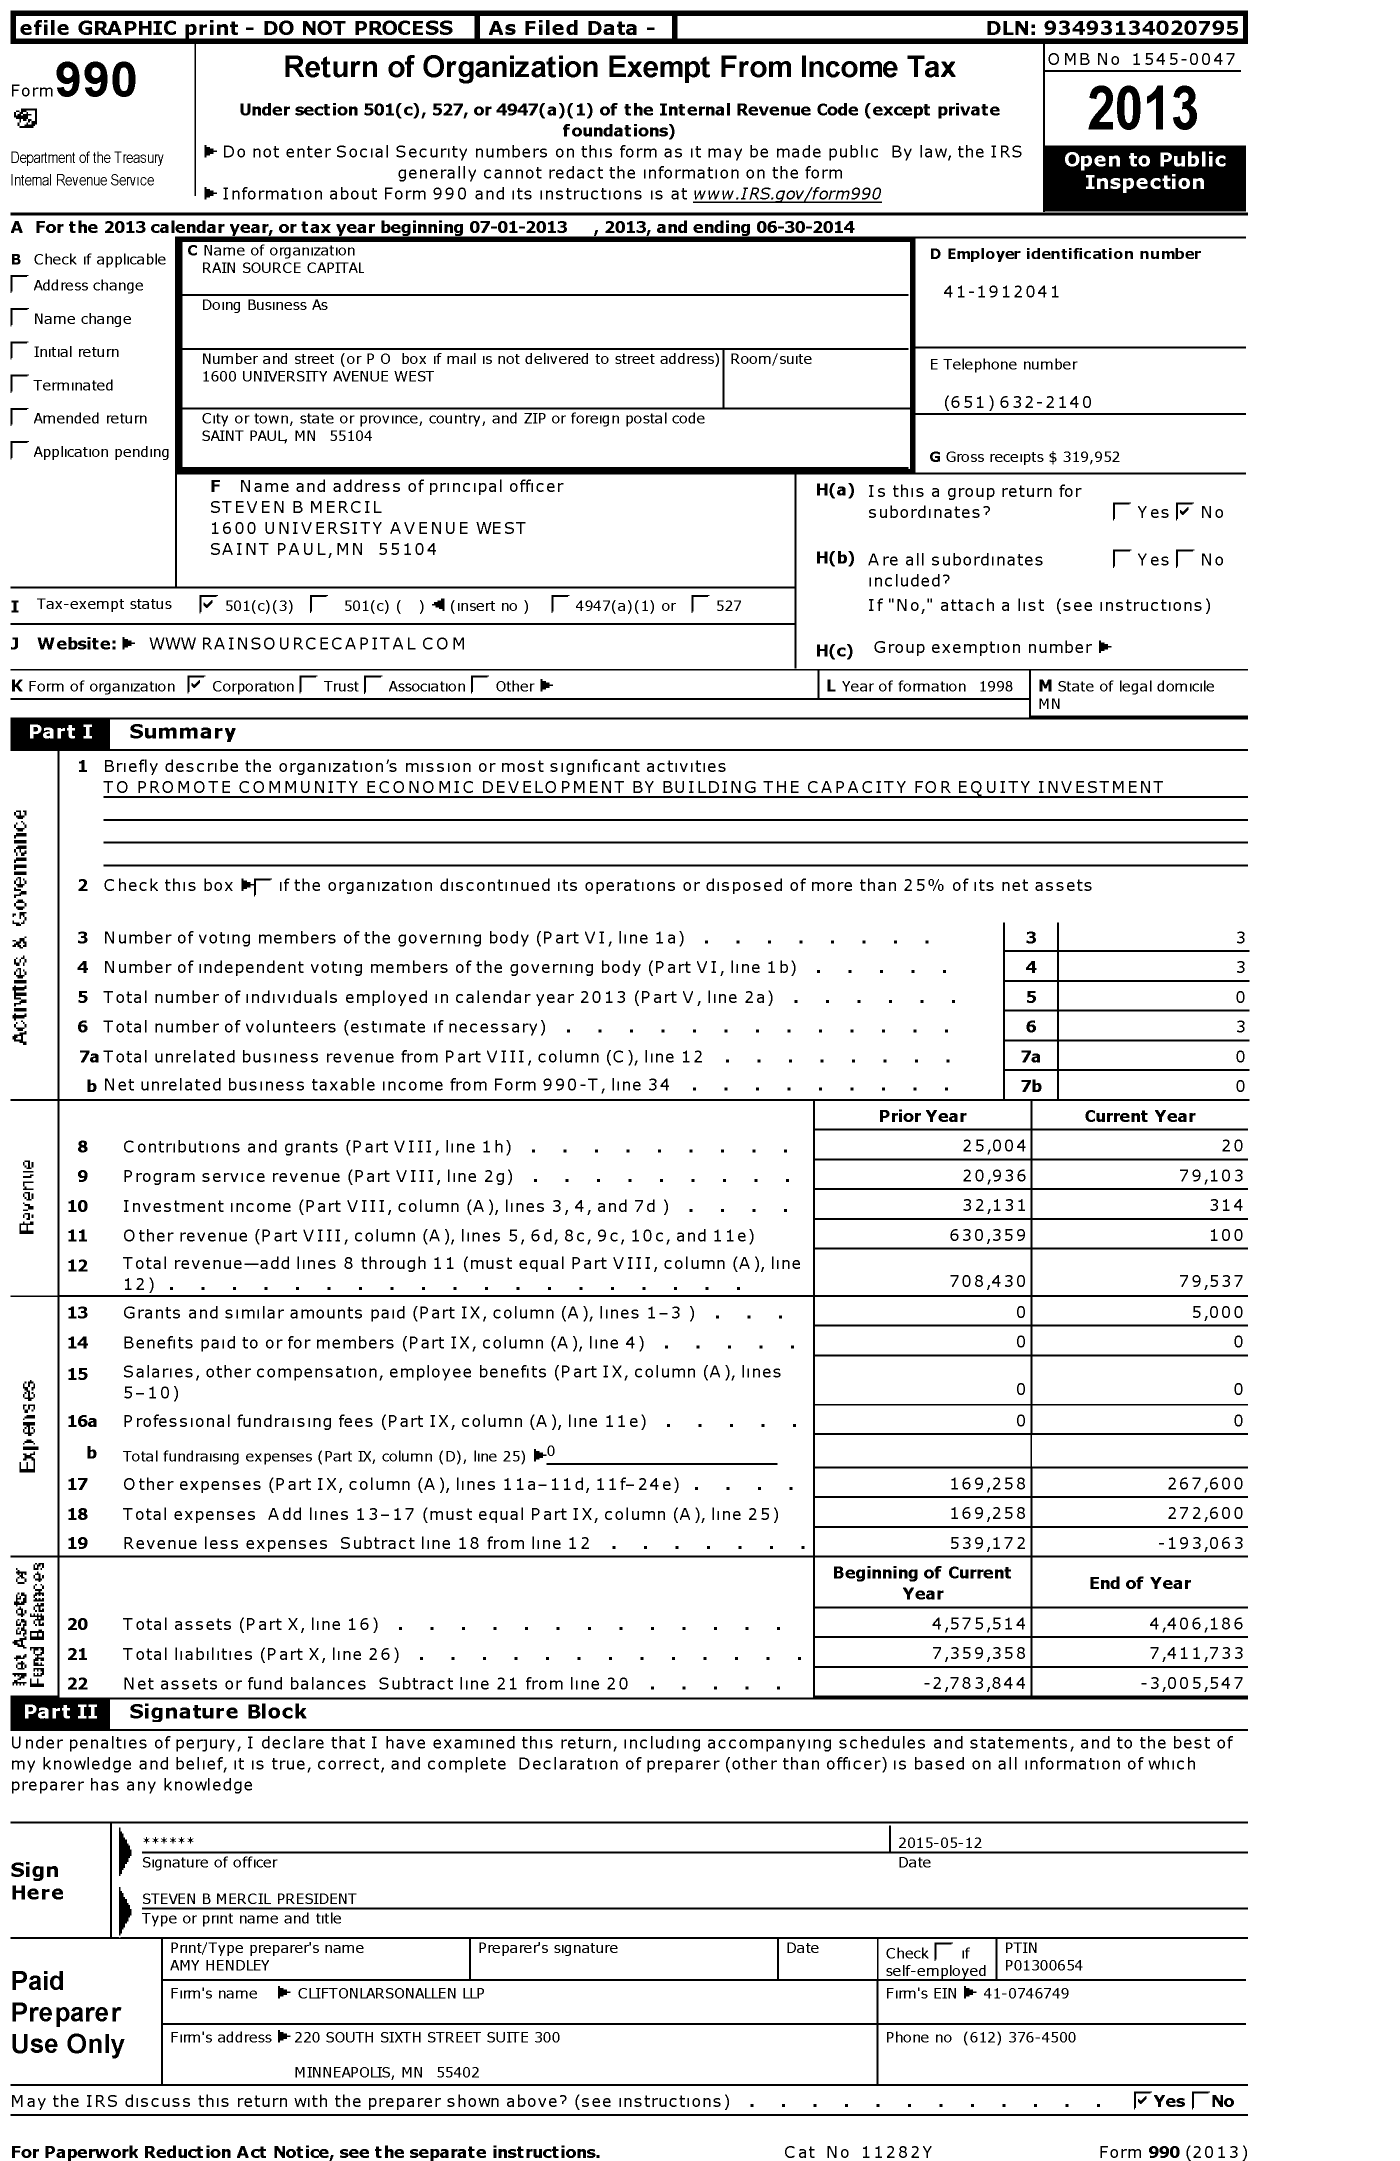 Image of first page of 2013 Form 990 for Rain Source Capital